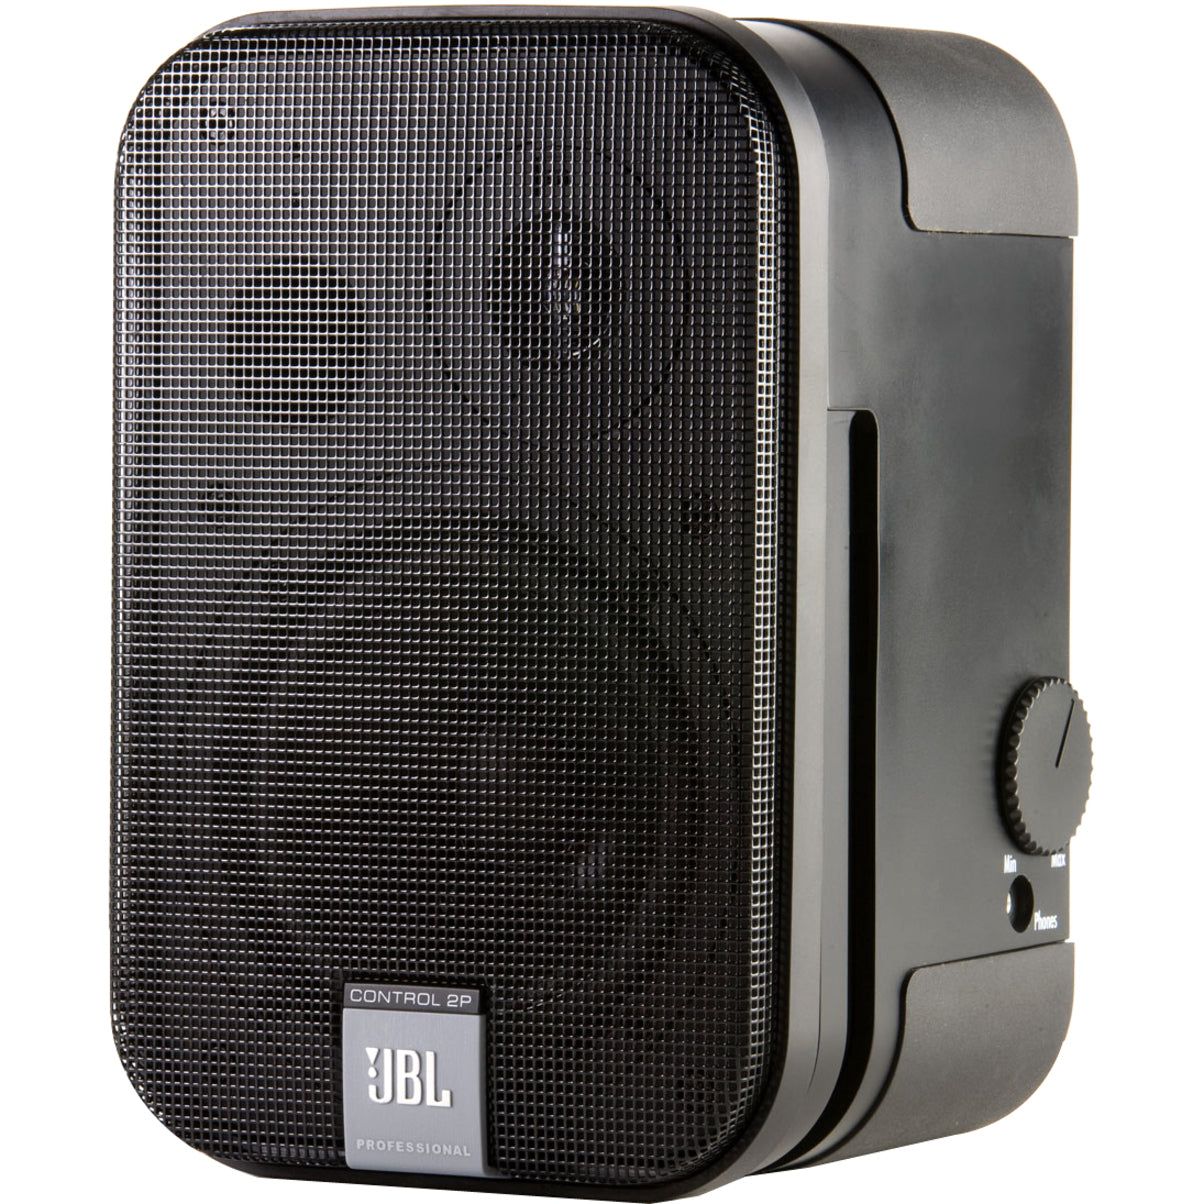 JBL Professional C2PM Control 2P Powered Master Speaker, 35W RMS Output Power, Black